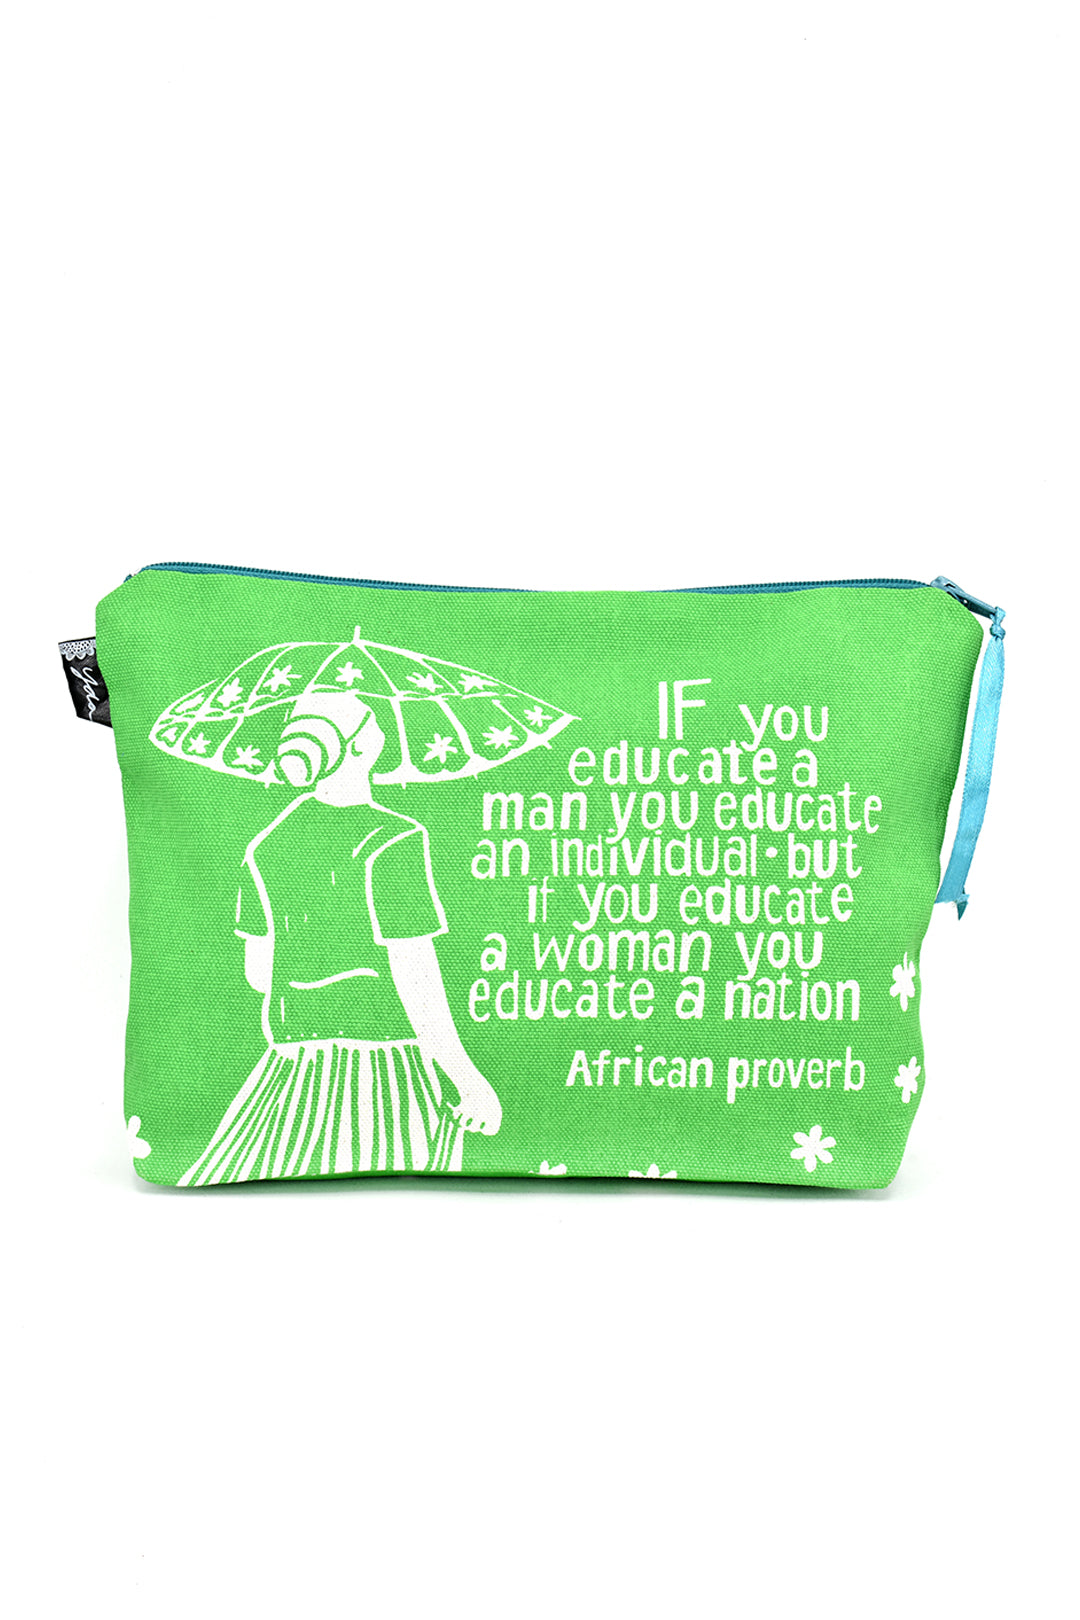 AMELIA HIDING "Educate a Woman" African Proverb Pouch in Lime or Hibiscus Lime "Educate a Woman" African Proverb Pouch